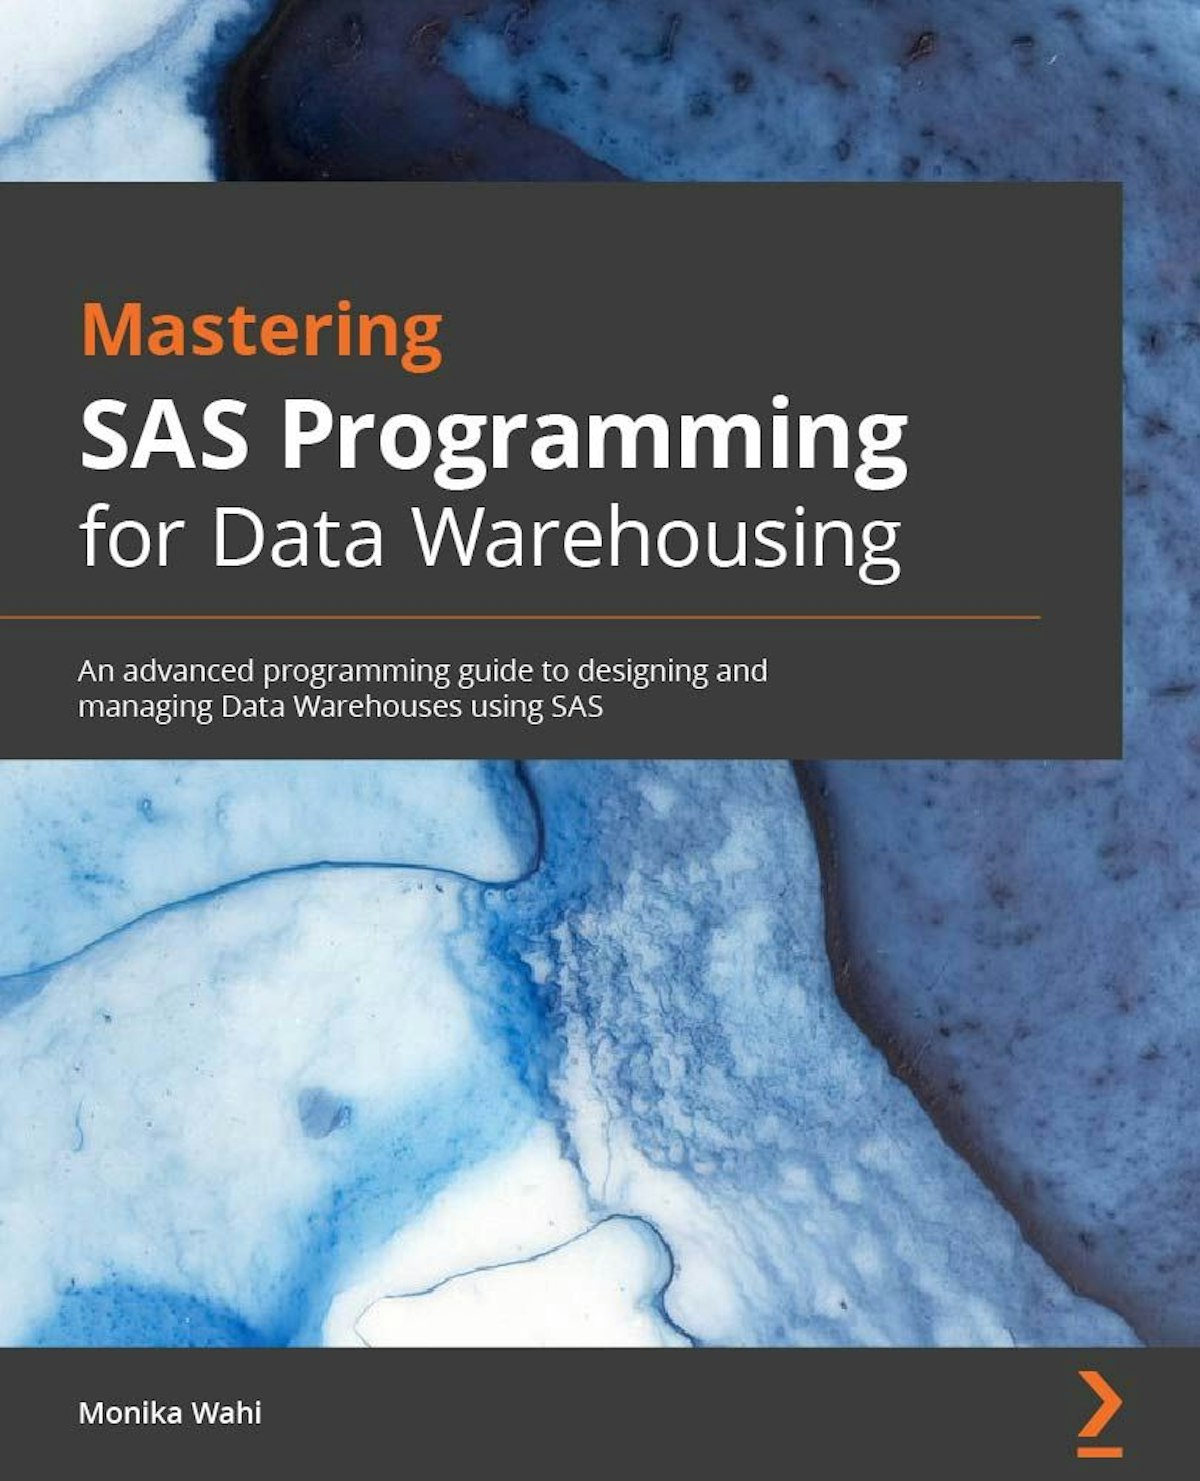 featured image - The SAS (Statistical Analysis System) Response To SQL Challenges in a Data Warehouse Environment